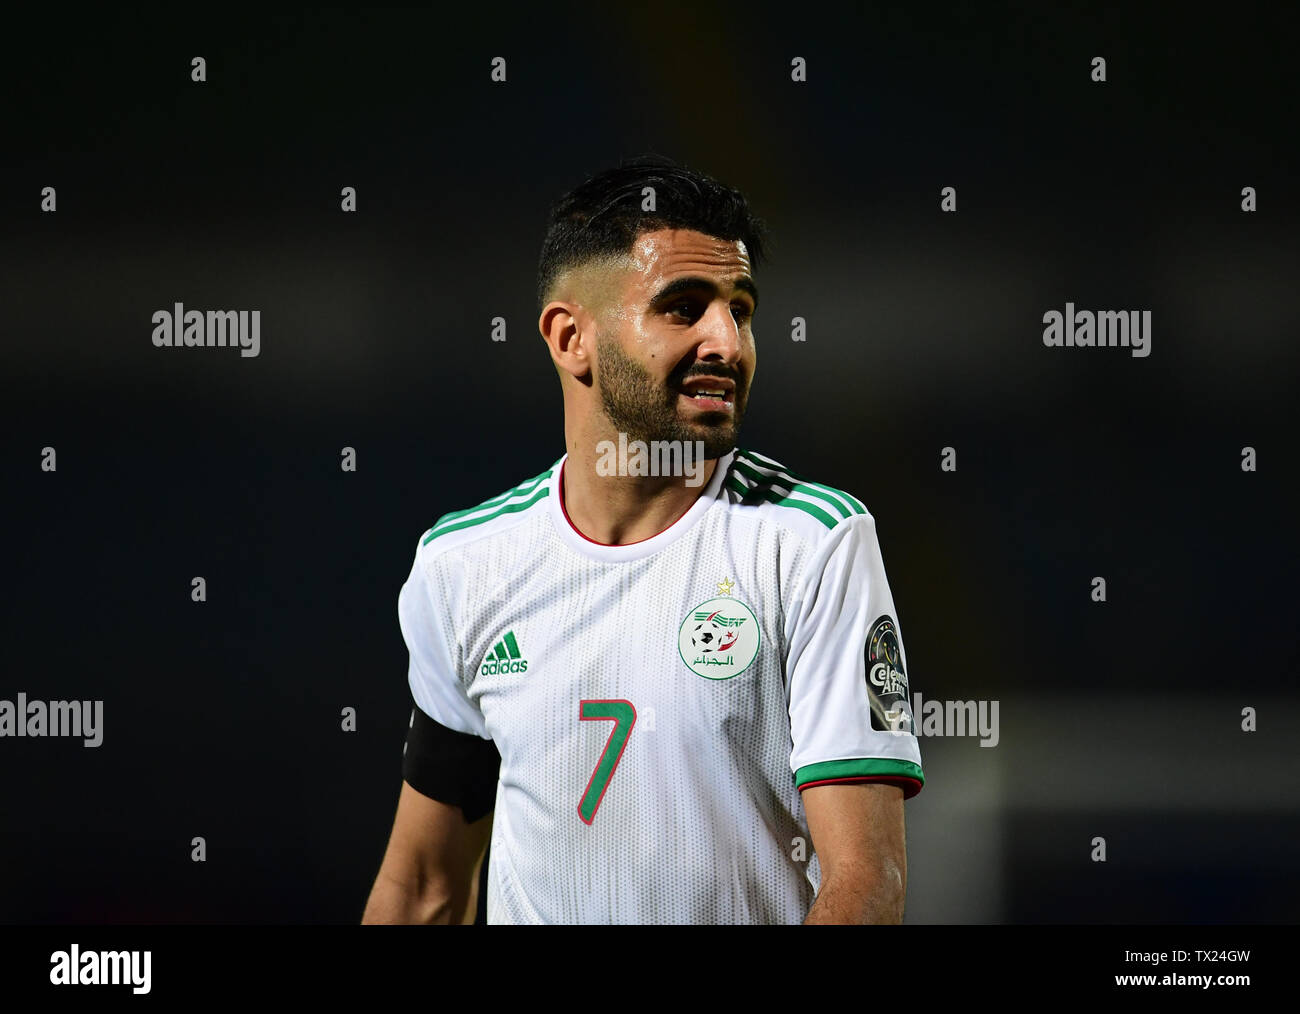 Cairo. 23rd June, 2019. Riyad Mahrez of Algeria looks on during the 2019 African Cup of Nations Group C match between Algeria and Kenya in Cario, Egypt on June 23, 2019. Algeria won 2-0. Credit: Wu Huiwo/Xinhua/Alamy Live News Stock Photo